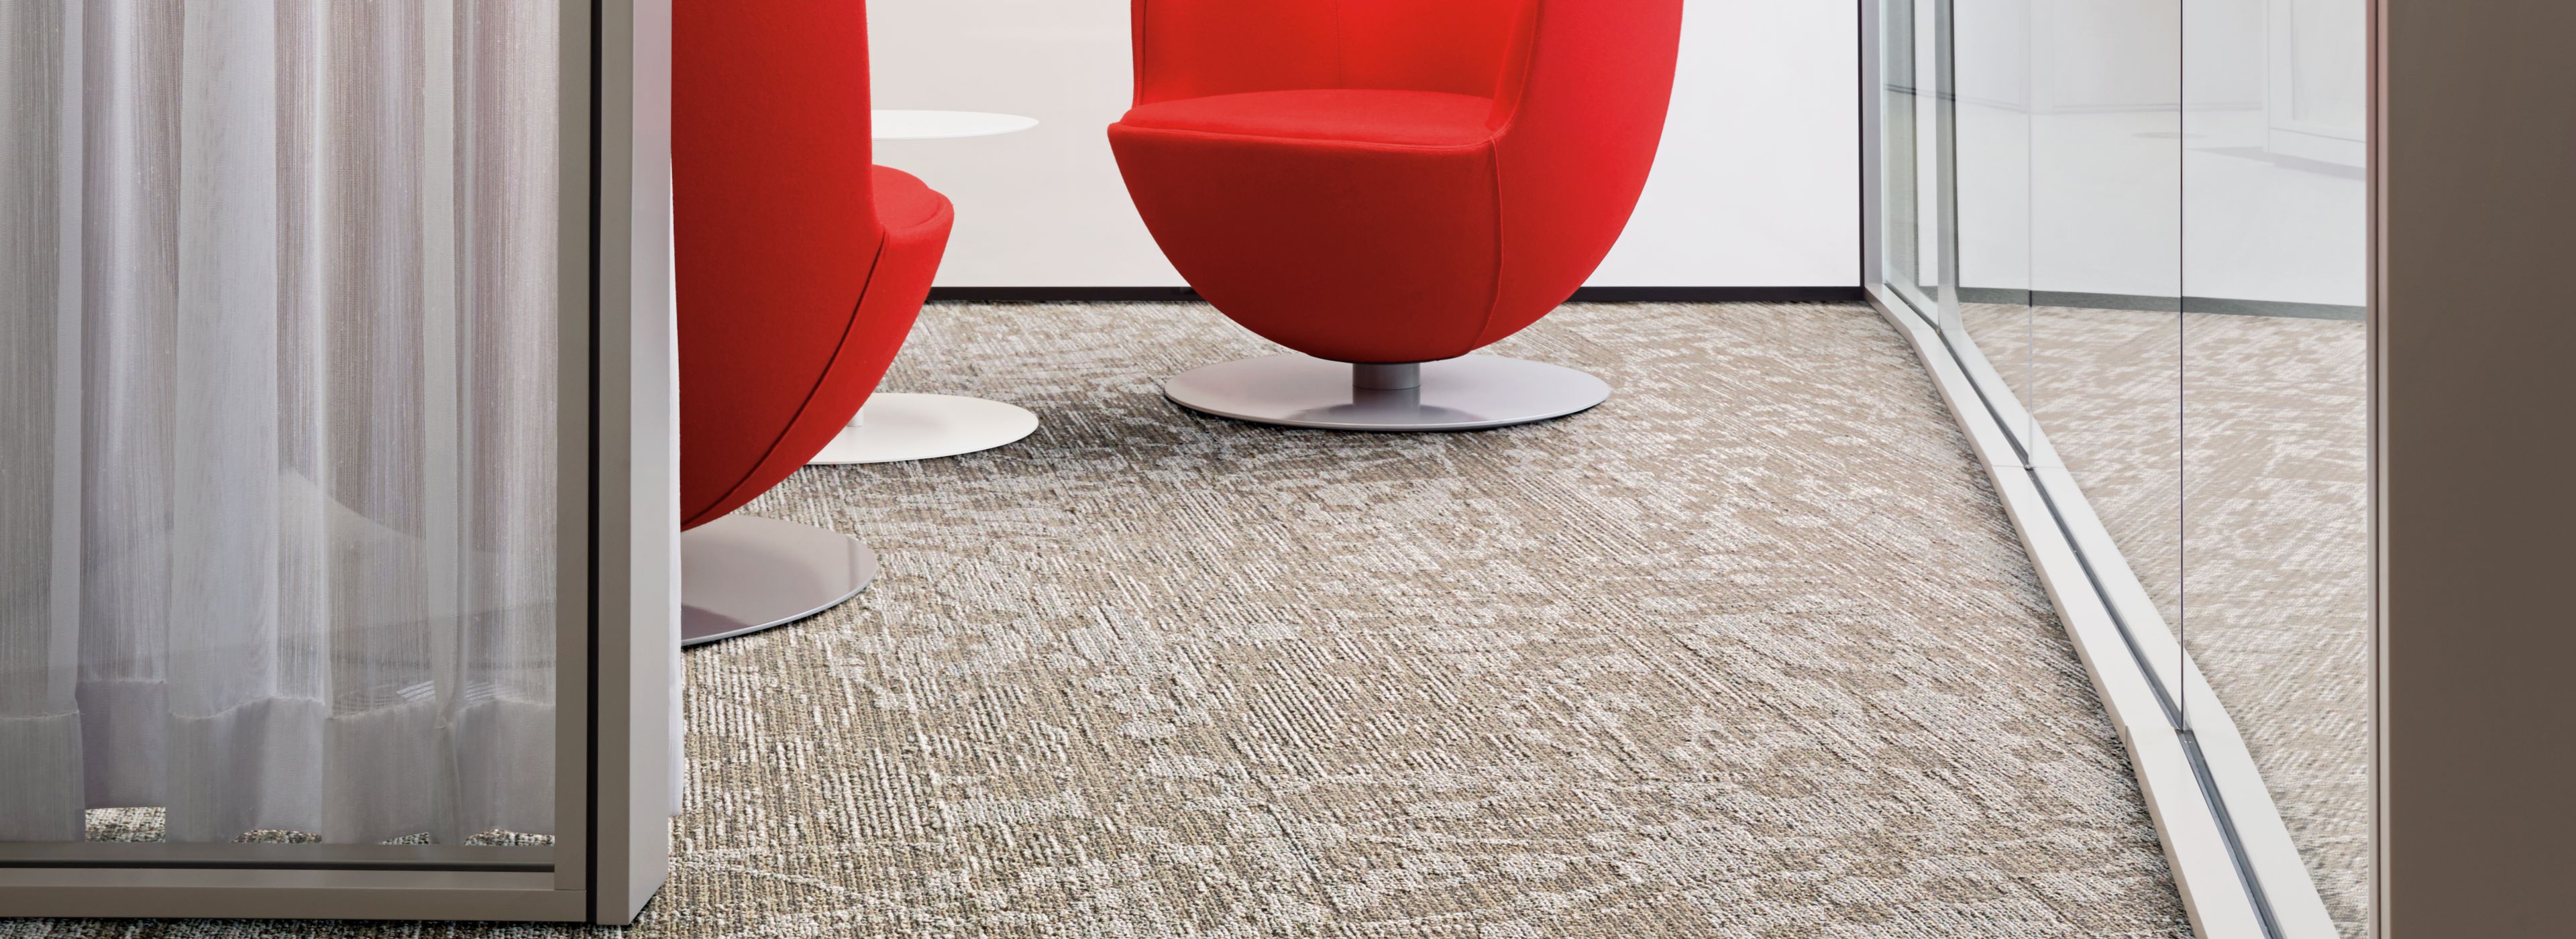 Interface WE154 plank carpet tile in waiting area with large red statement chairs image number 2